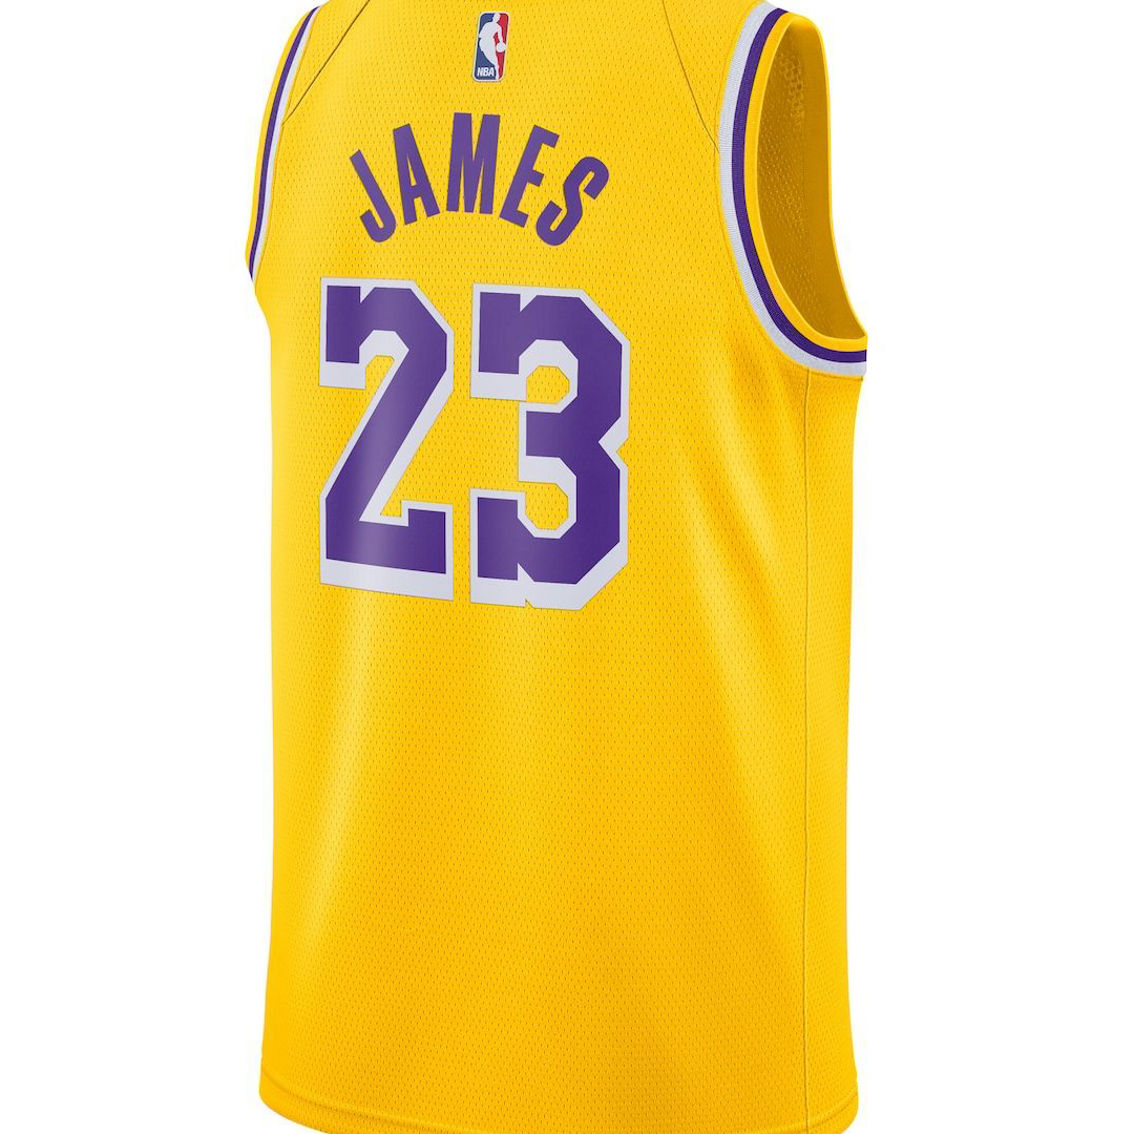 Nike Men's LeBron James Gold Los Angeles Lakers Swingman Player Jersey - Icon Edition - Image 4 of 4